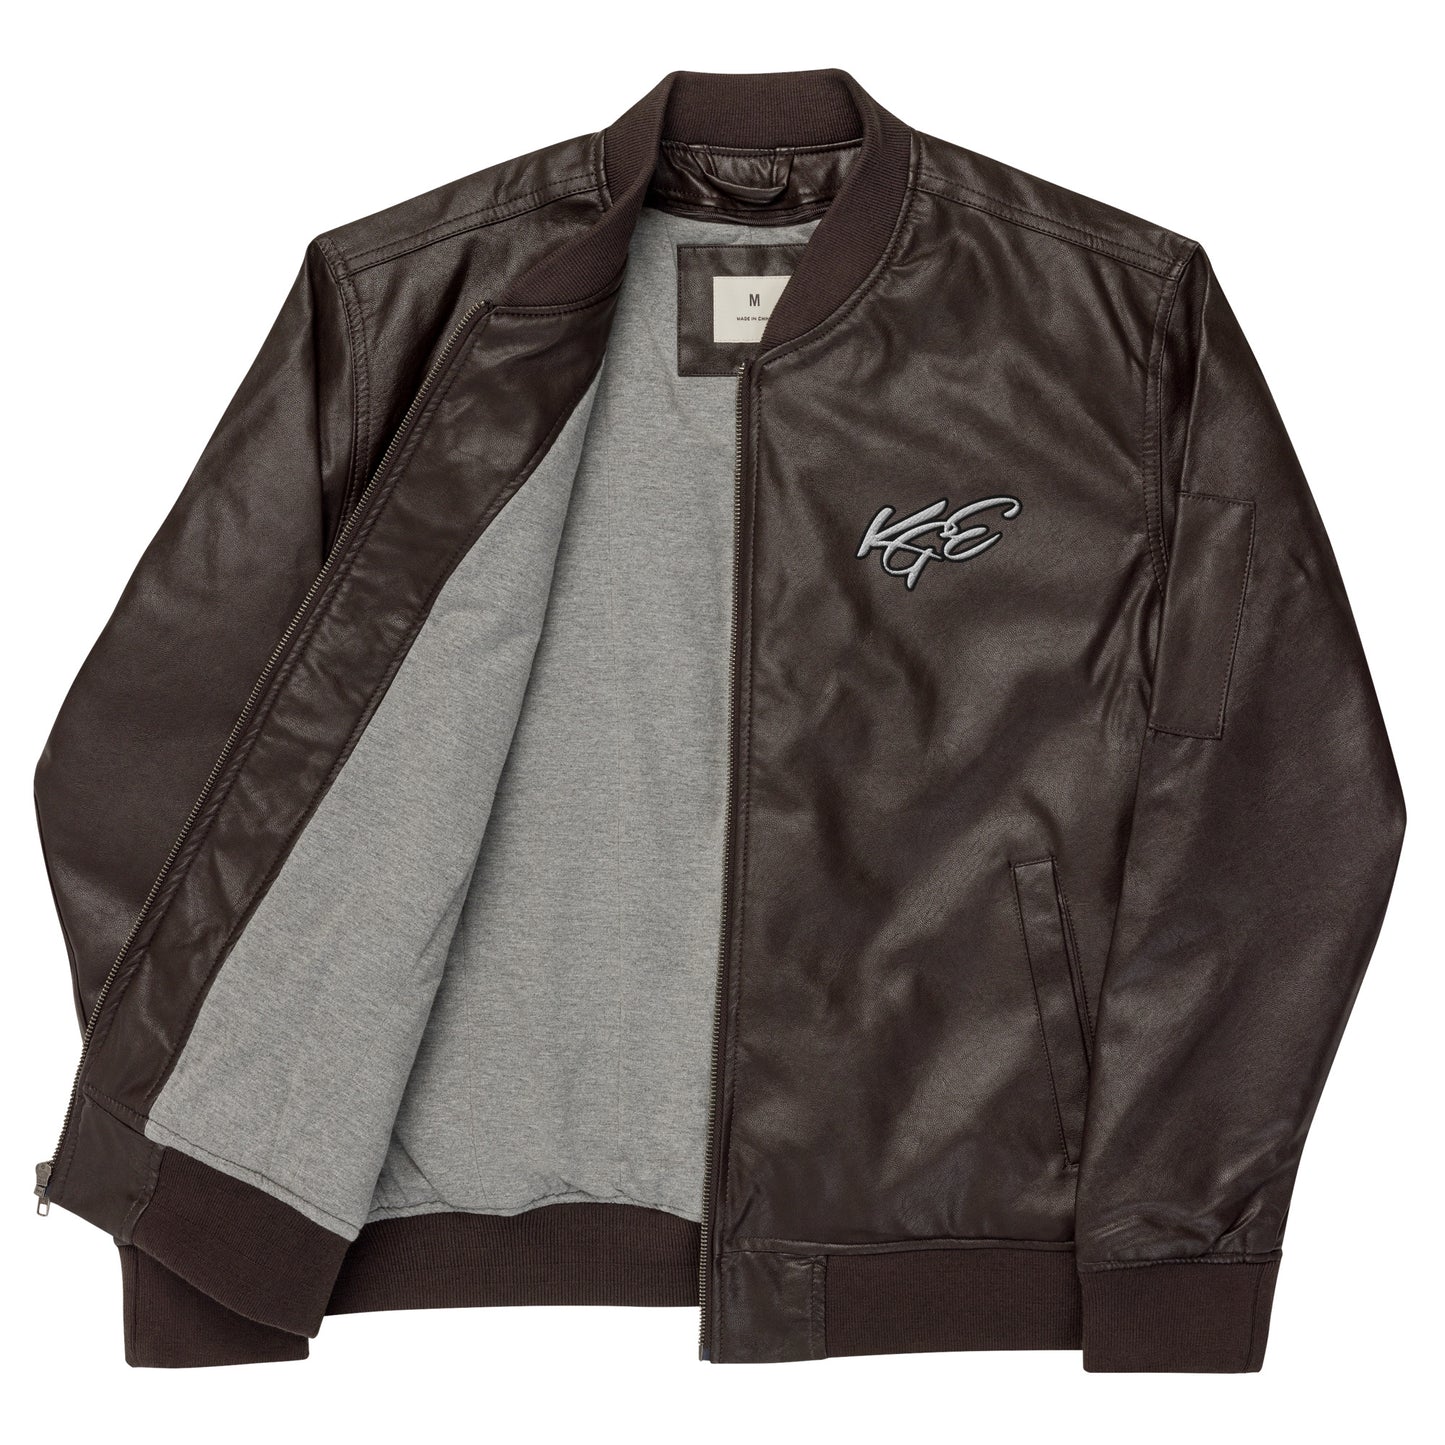 (New) KGE Signature Embroidery PU Leather Bomber Jacket